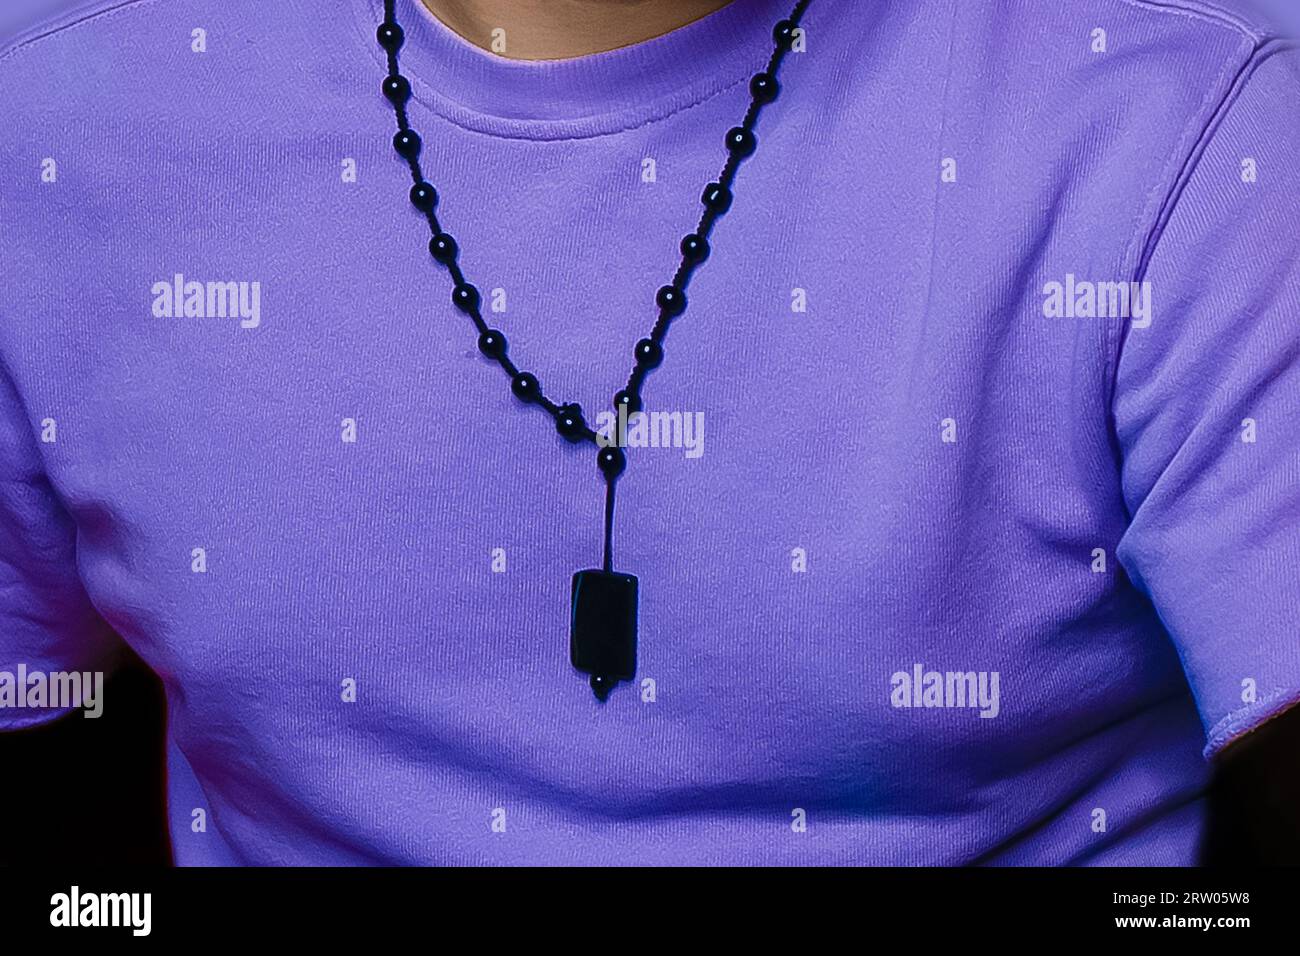 Men's style clothing fashionable lilac T-shirt with a decoration around the neck close-up. Stock Photo